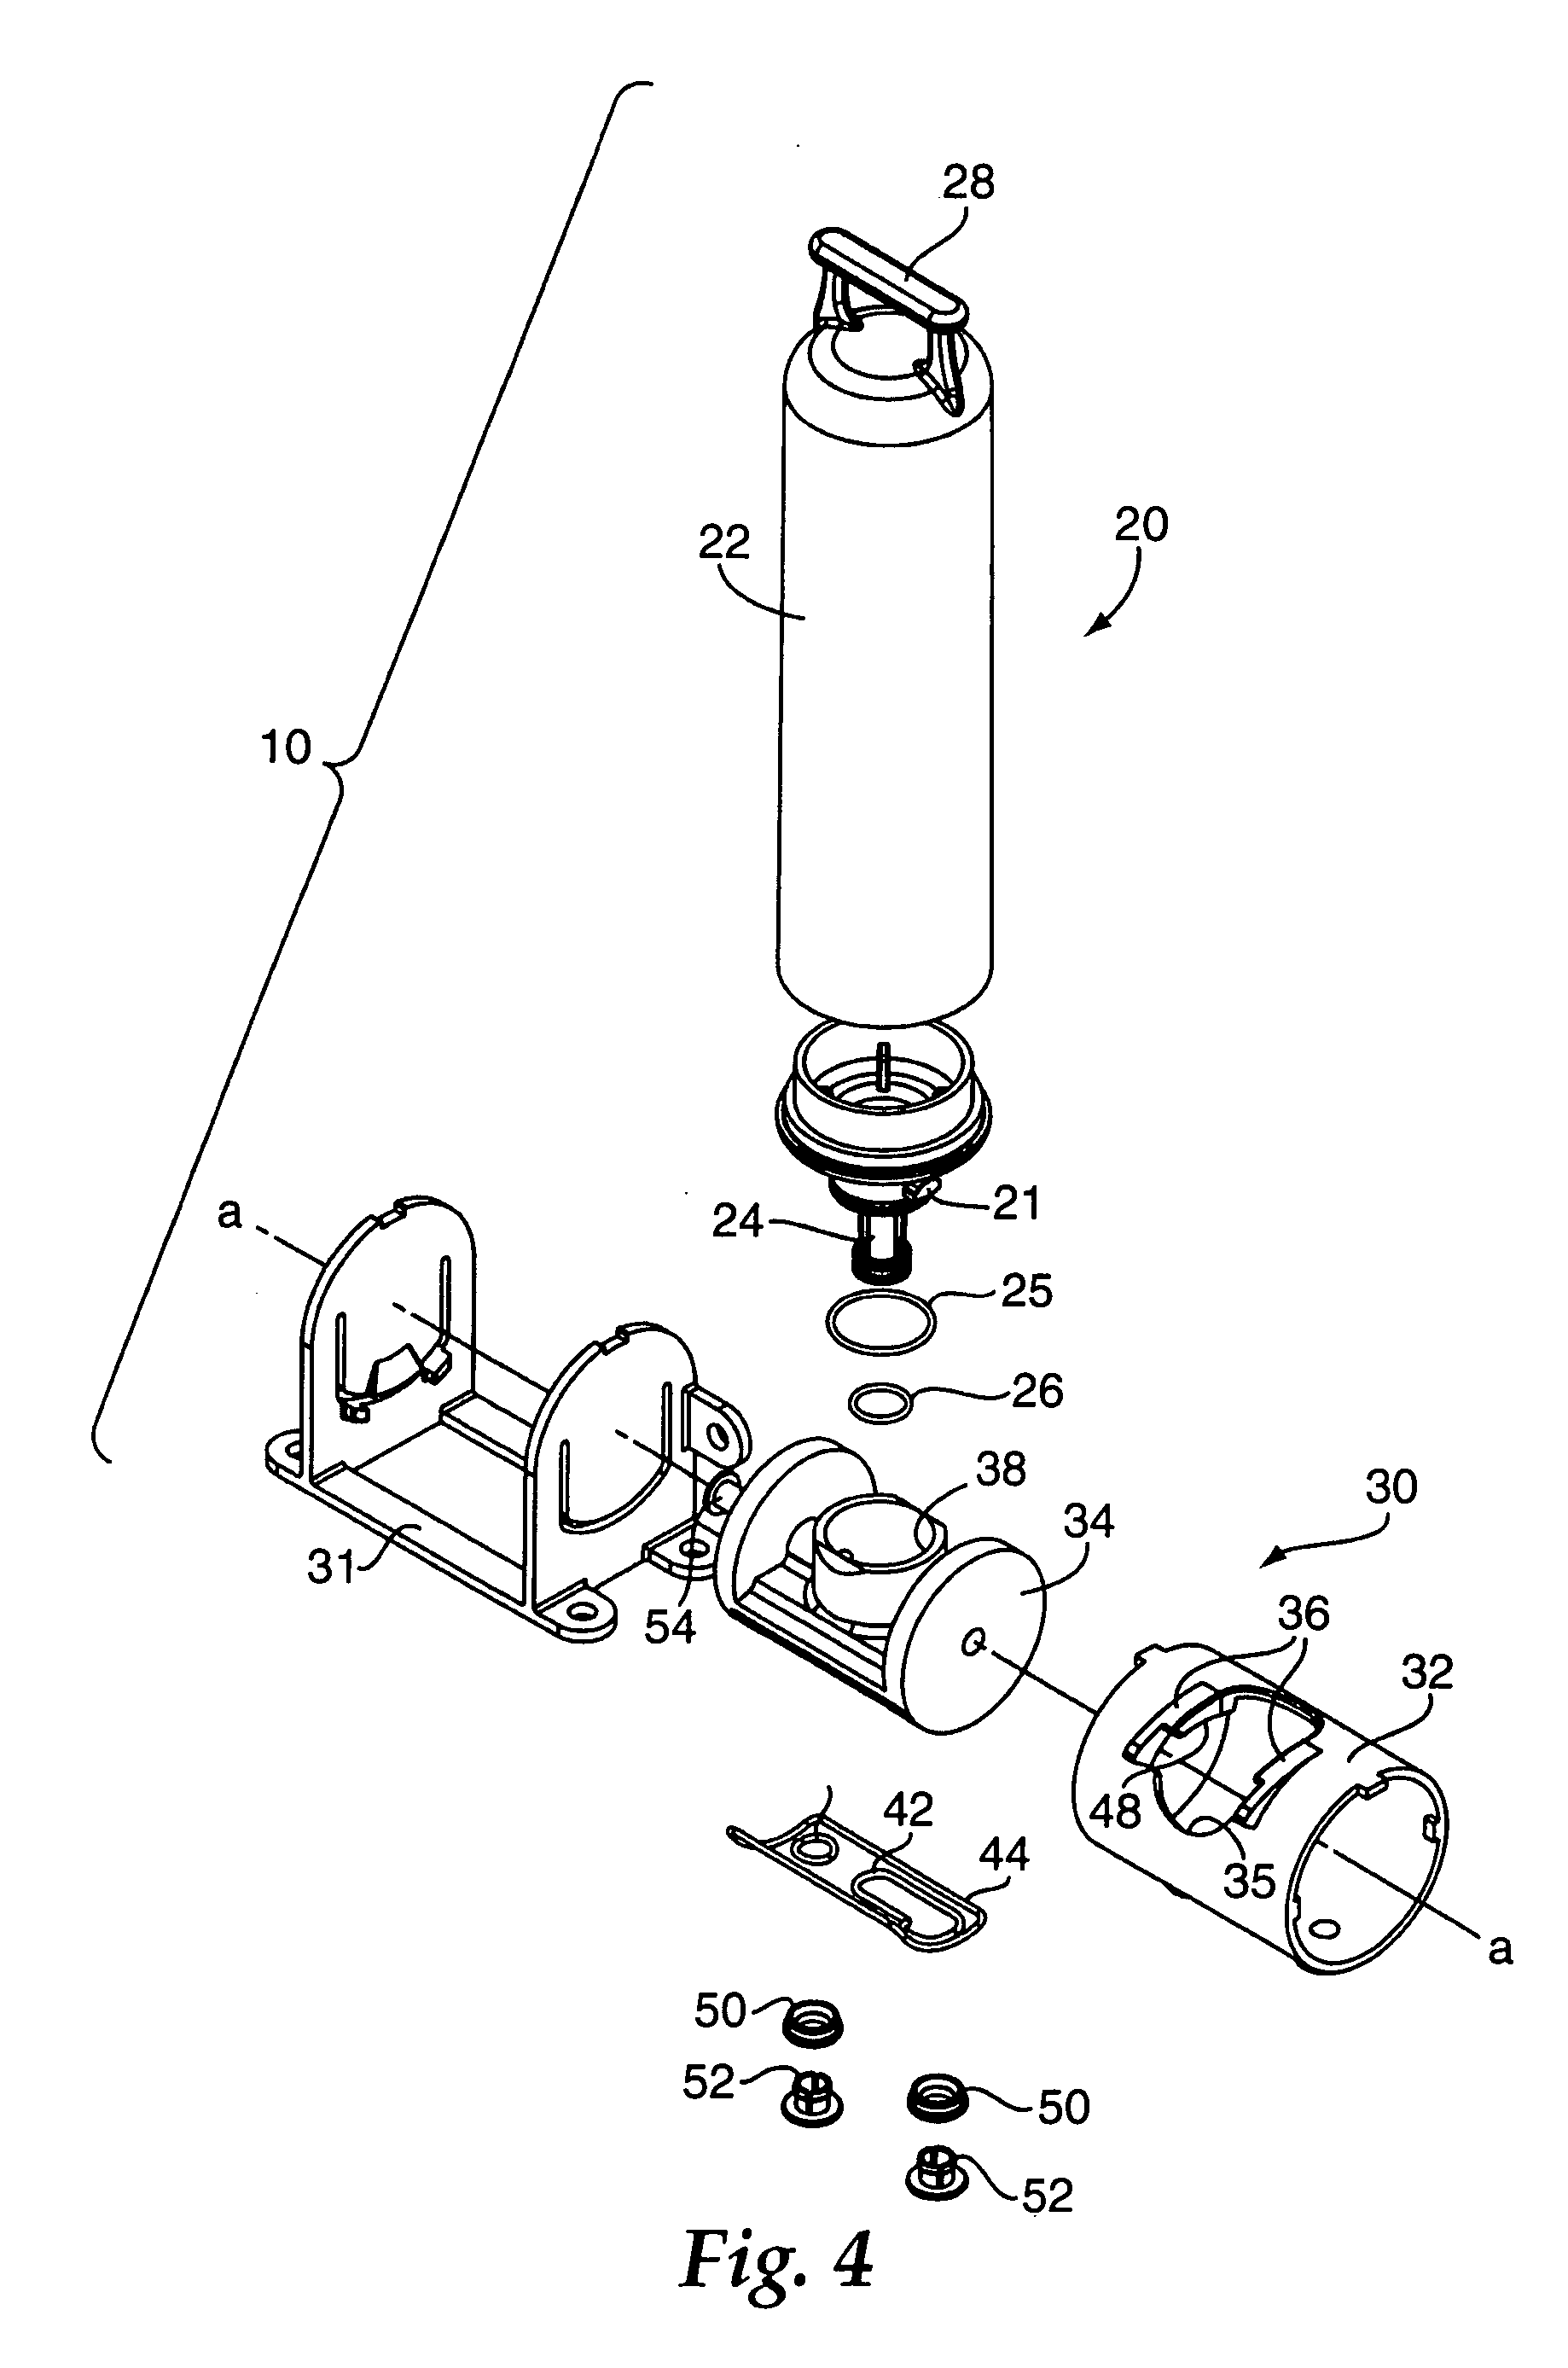 Spool valve manifold interconnect for a filter system